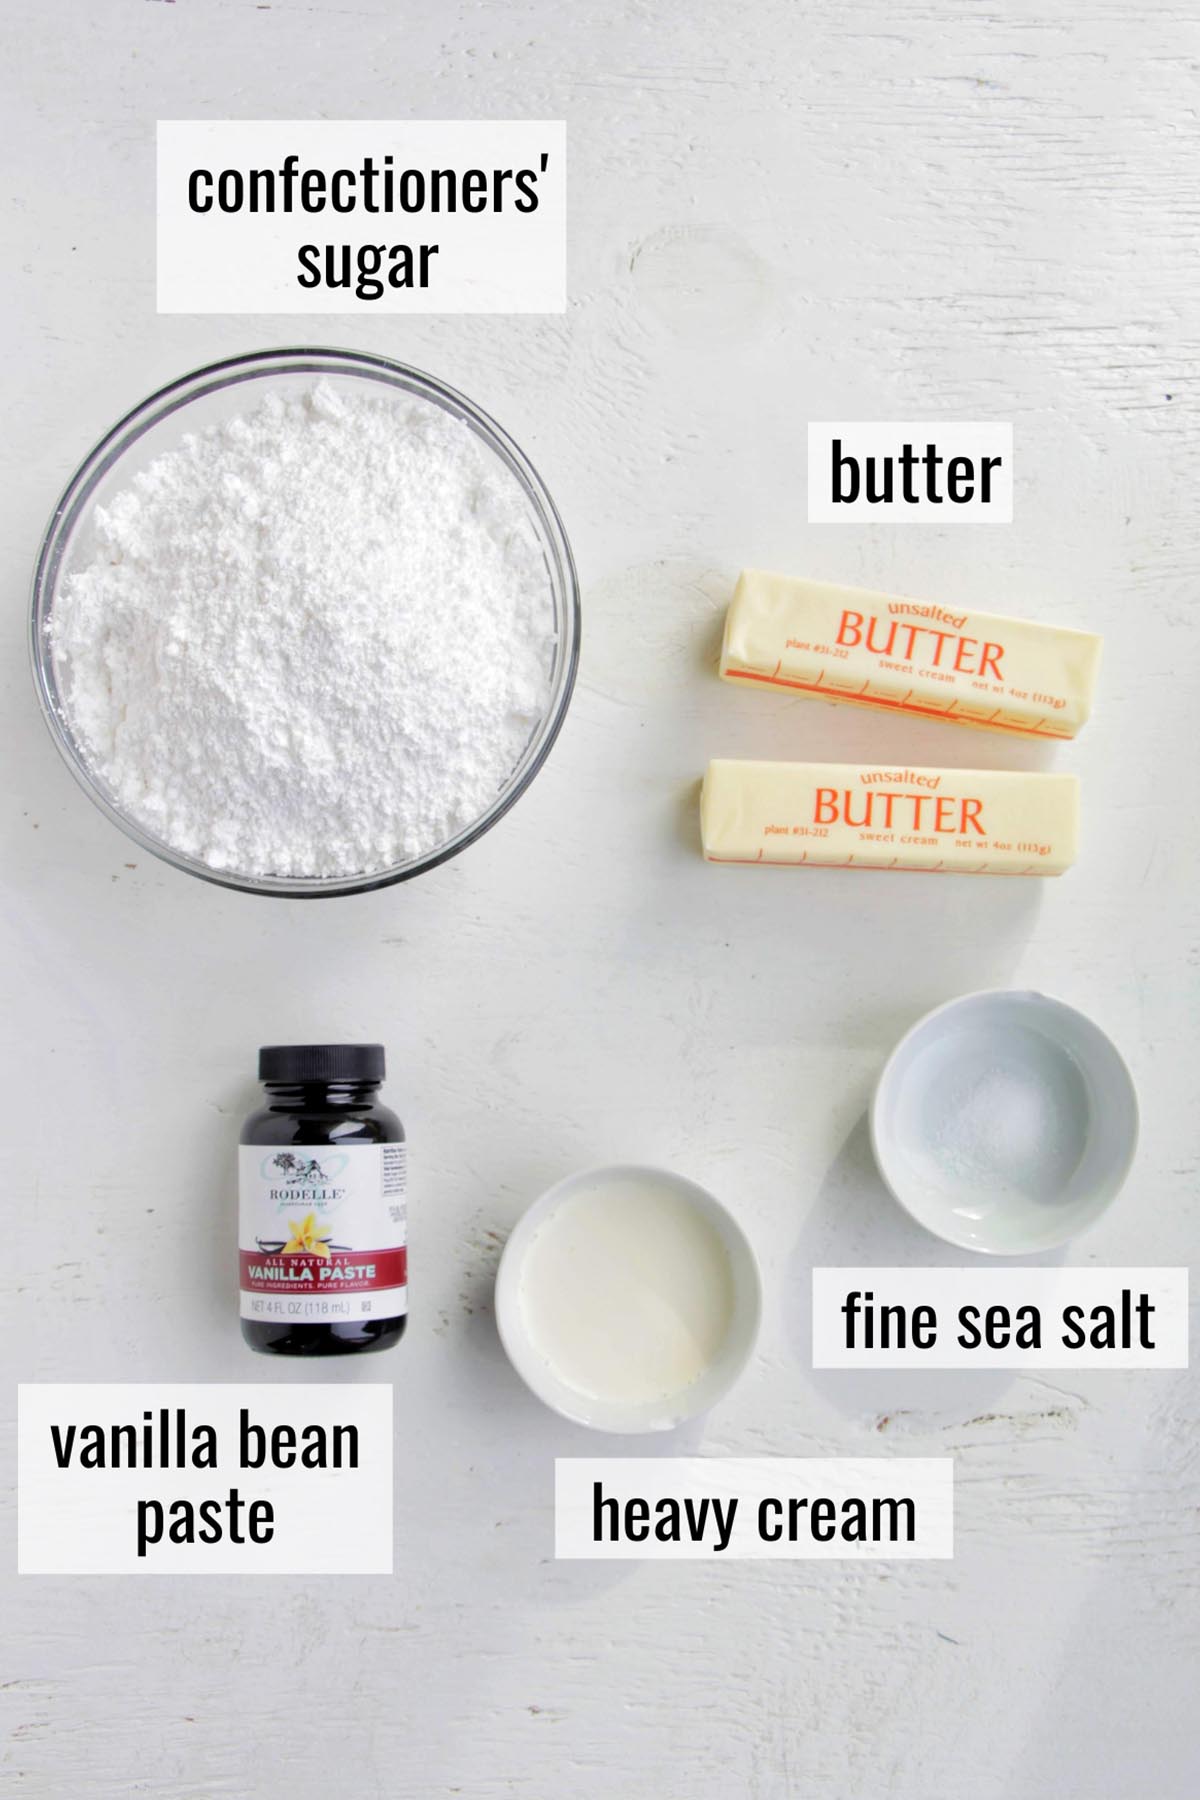 buttercream ingredients with labels.